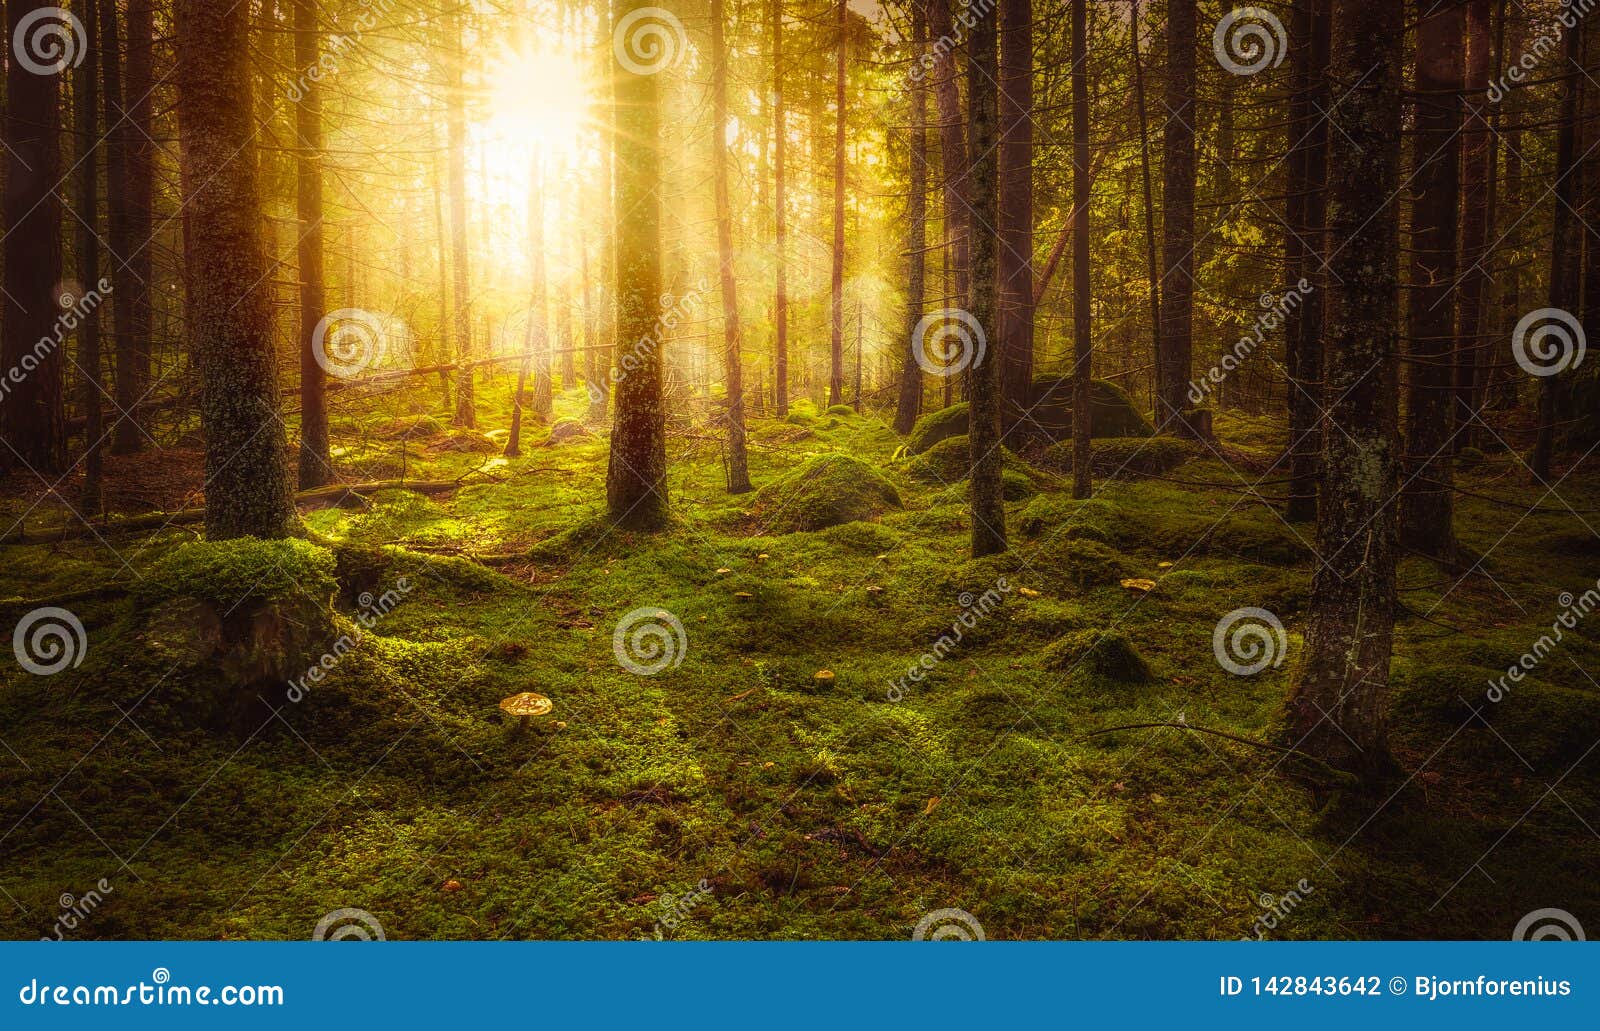 green mossy fairytale forest with beautiful light from the sun shining between the trees in the mist.